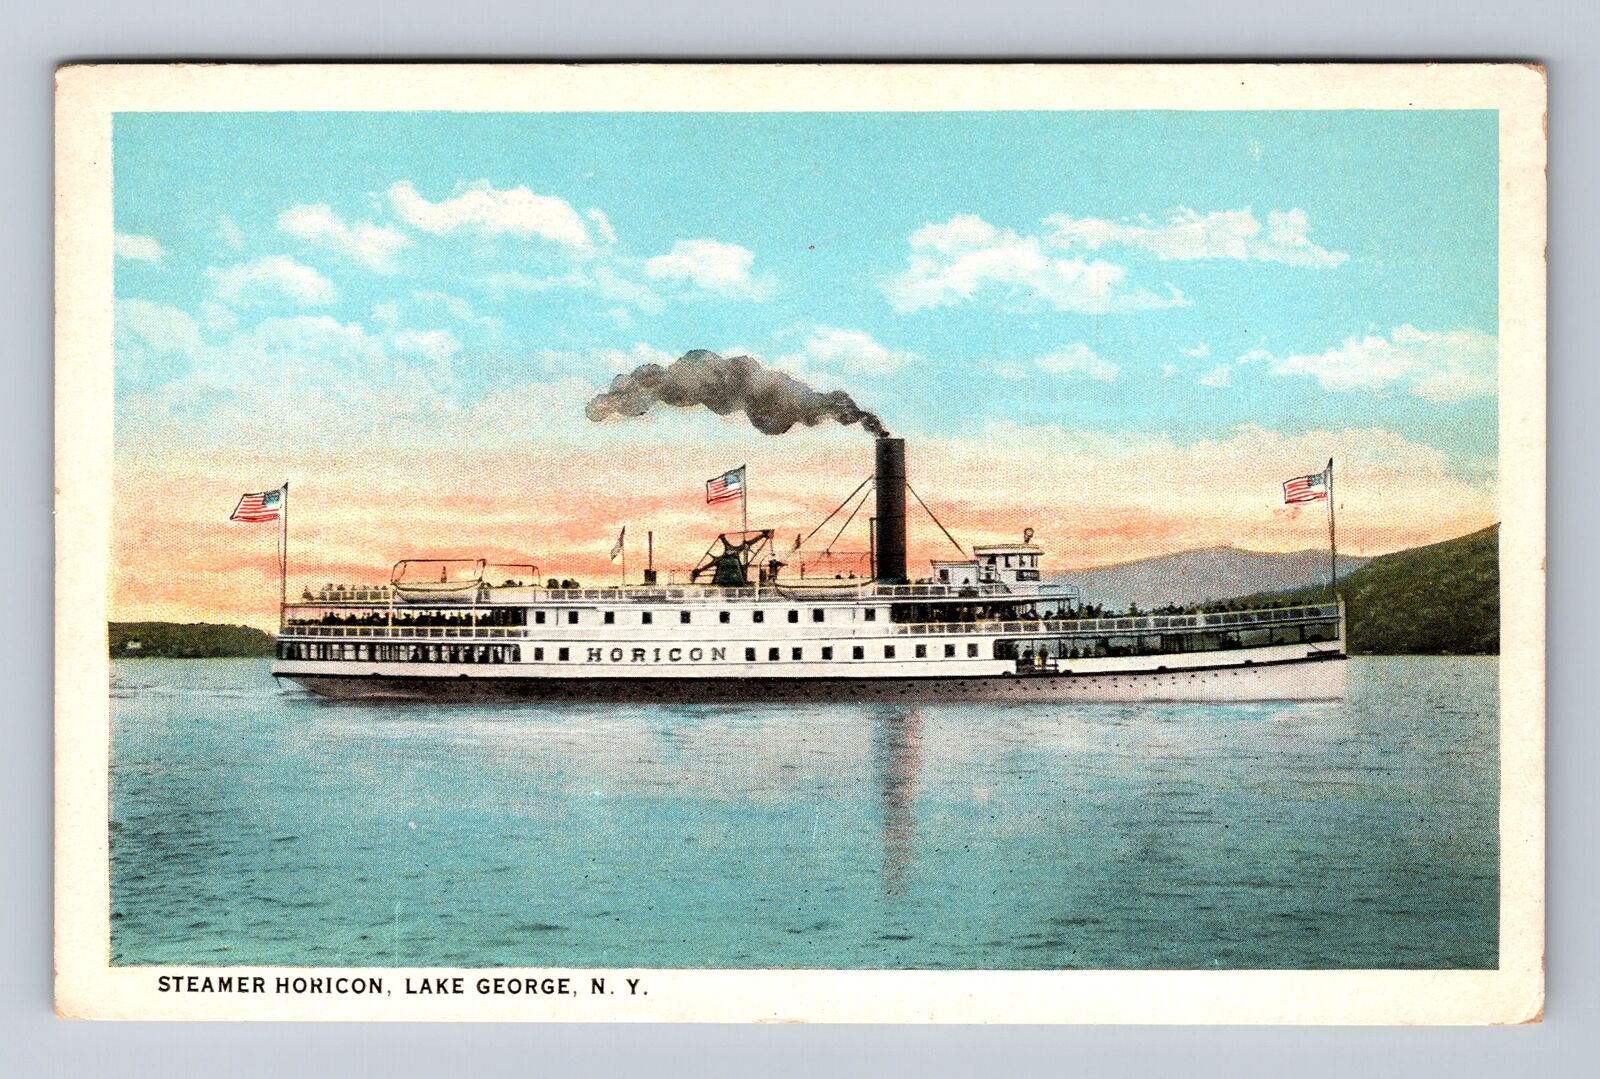 Lake George NY-New York, Scenic View Steamer Horicon, Vintage Postcard